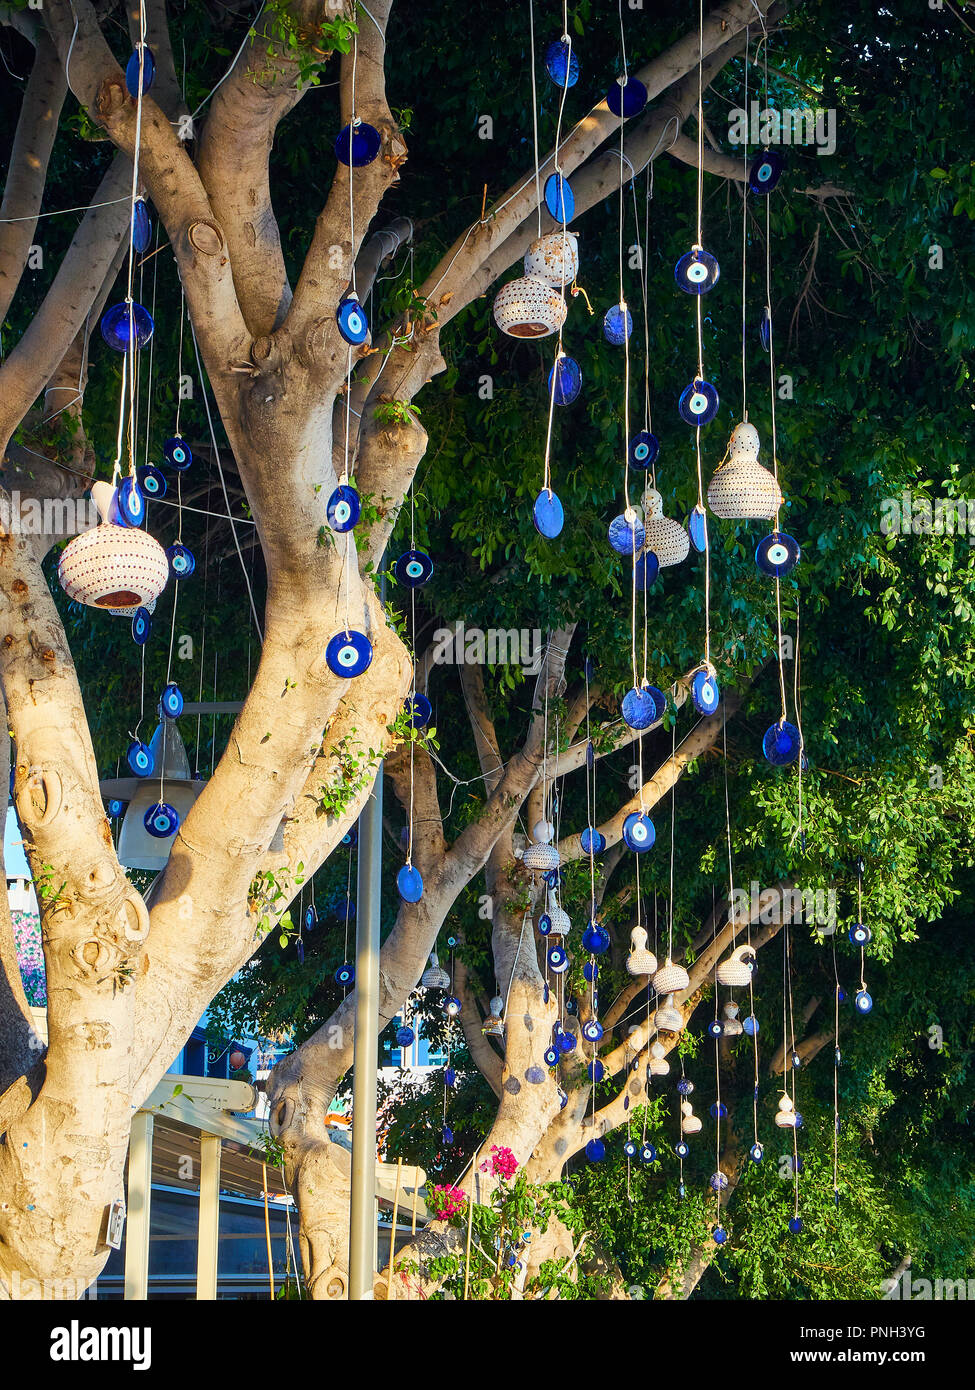 A lot of Nazar boncugu, a Turkish eye-shaped amulet hanging from the branches of a tree. Turkey. Stock Photo